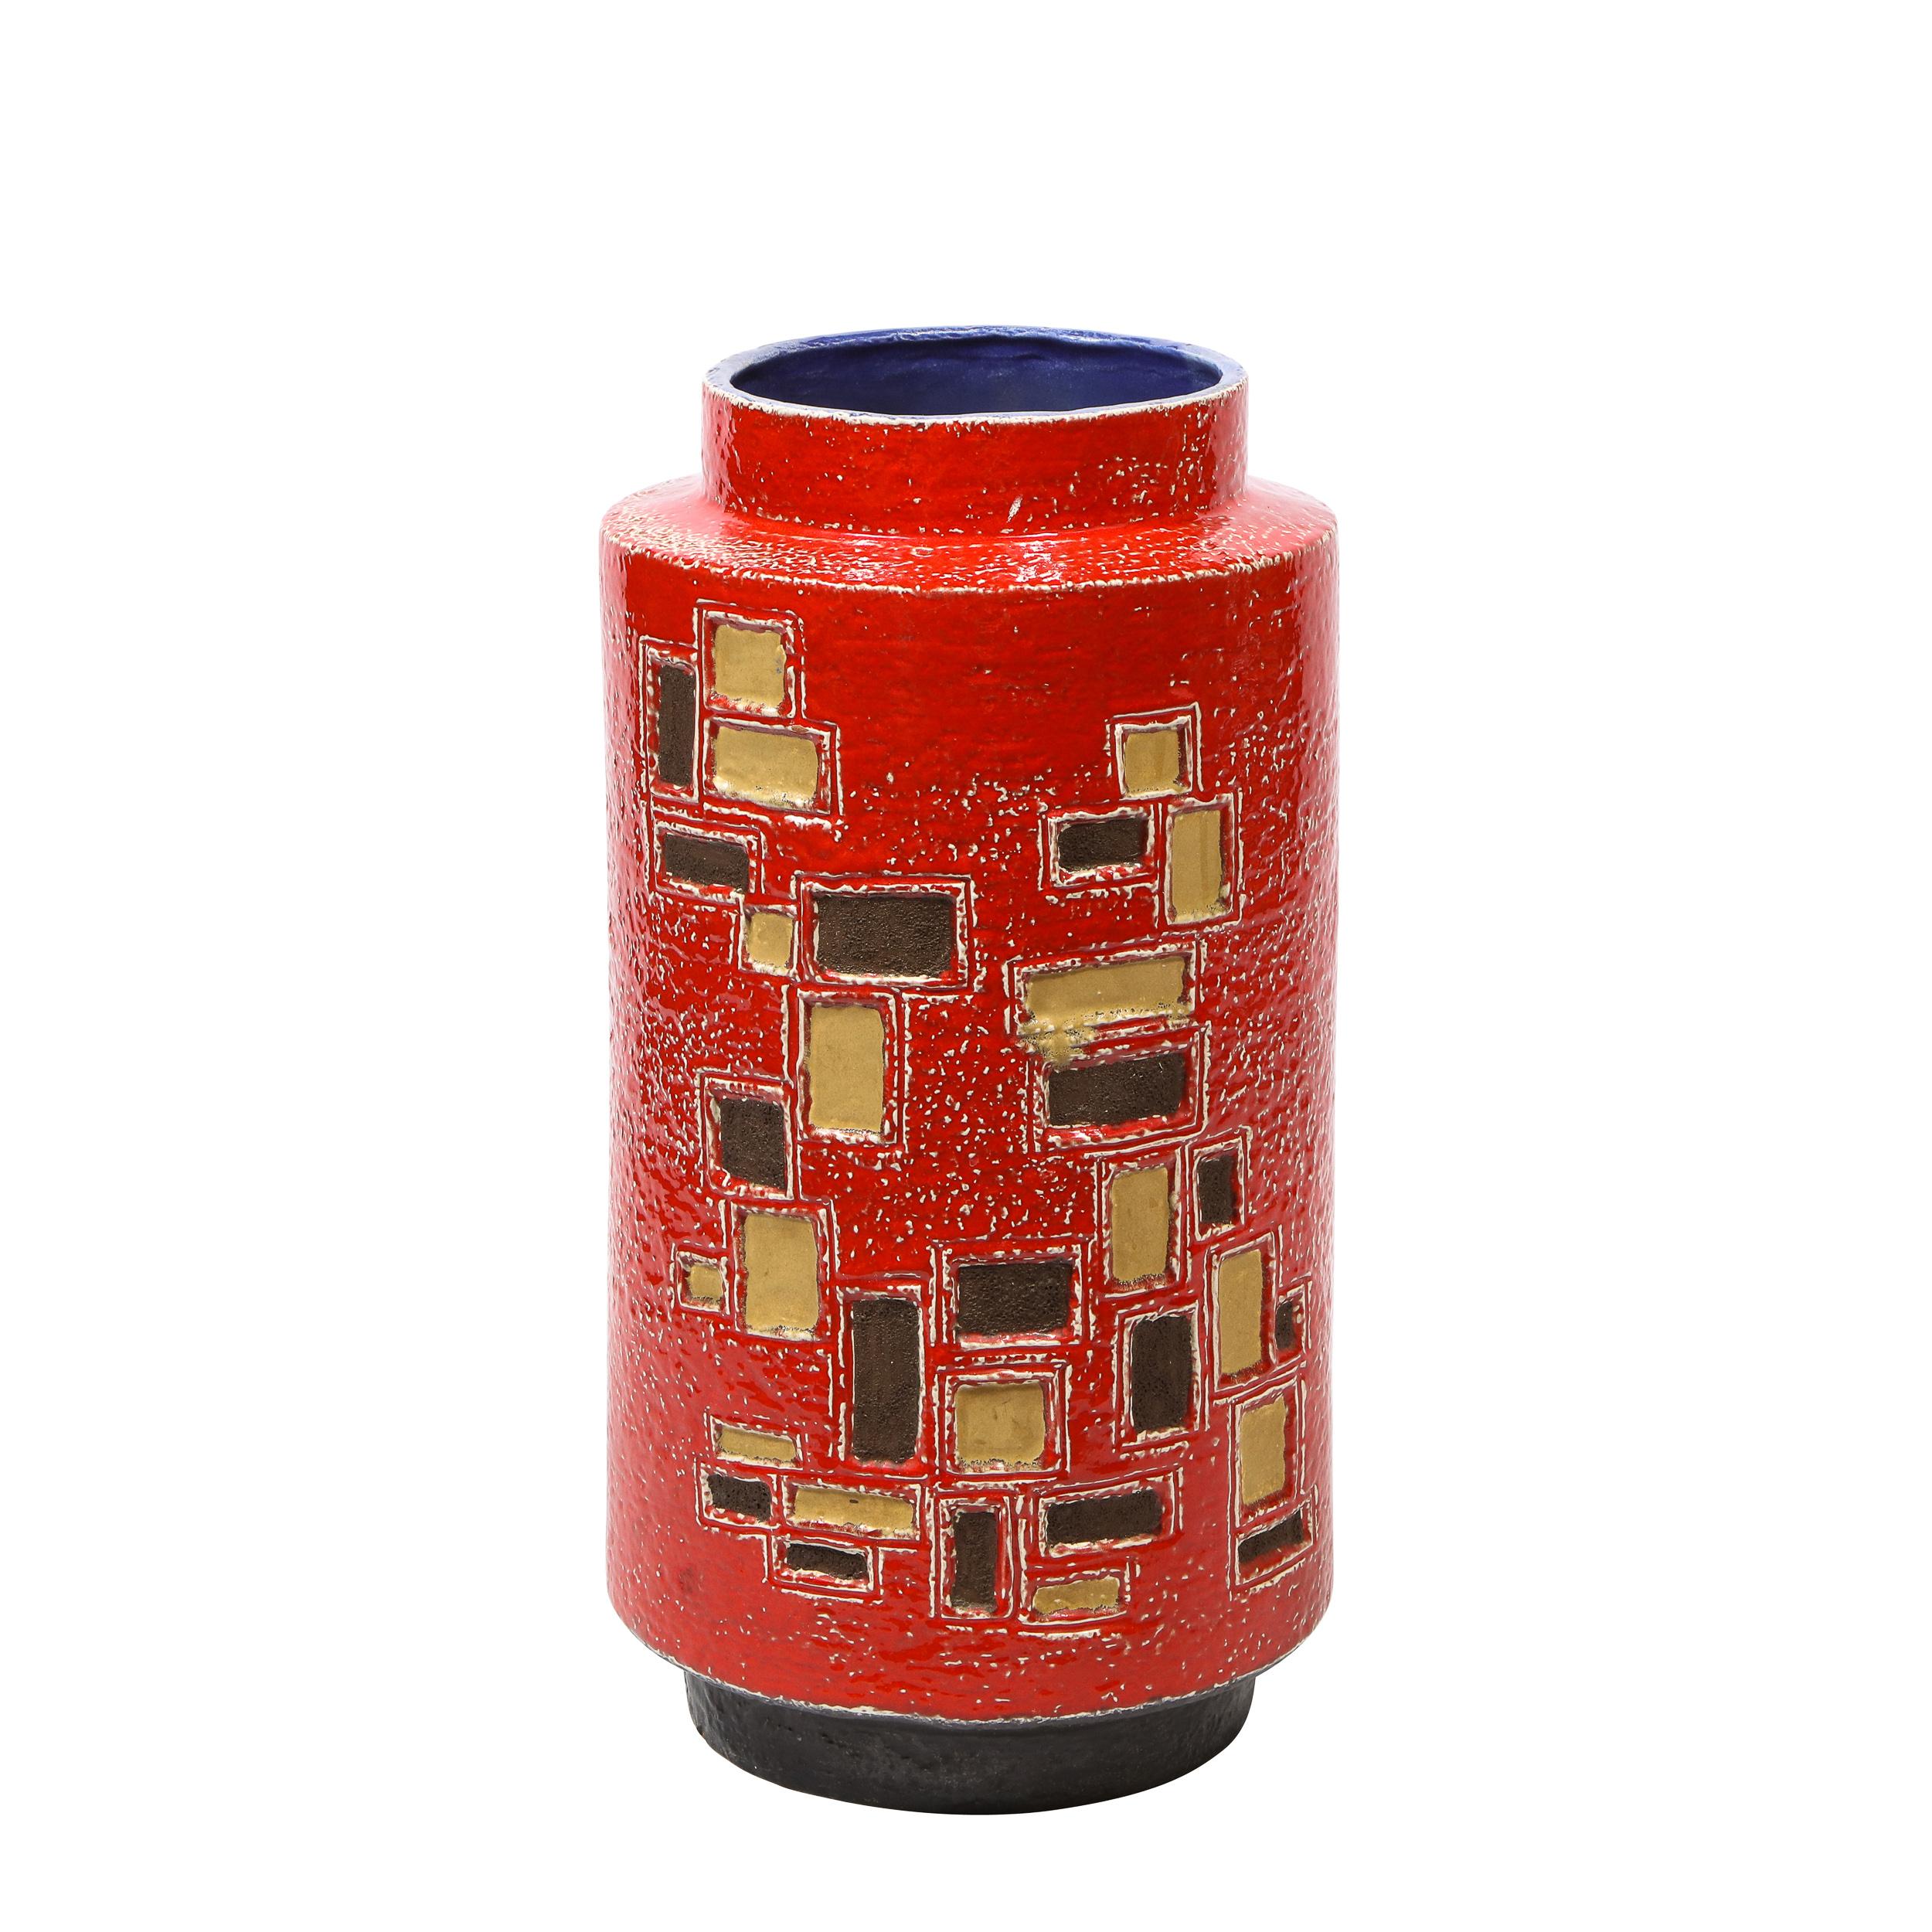 Italian Mid-Century Modern Scarlet Red Handpainted Umbrella Stand w/ Rectilinear Details For Sale